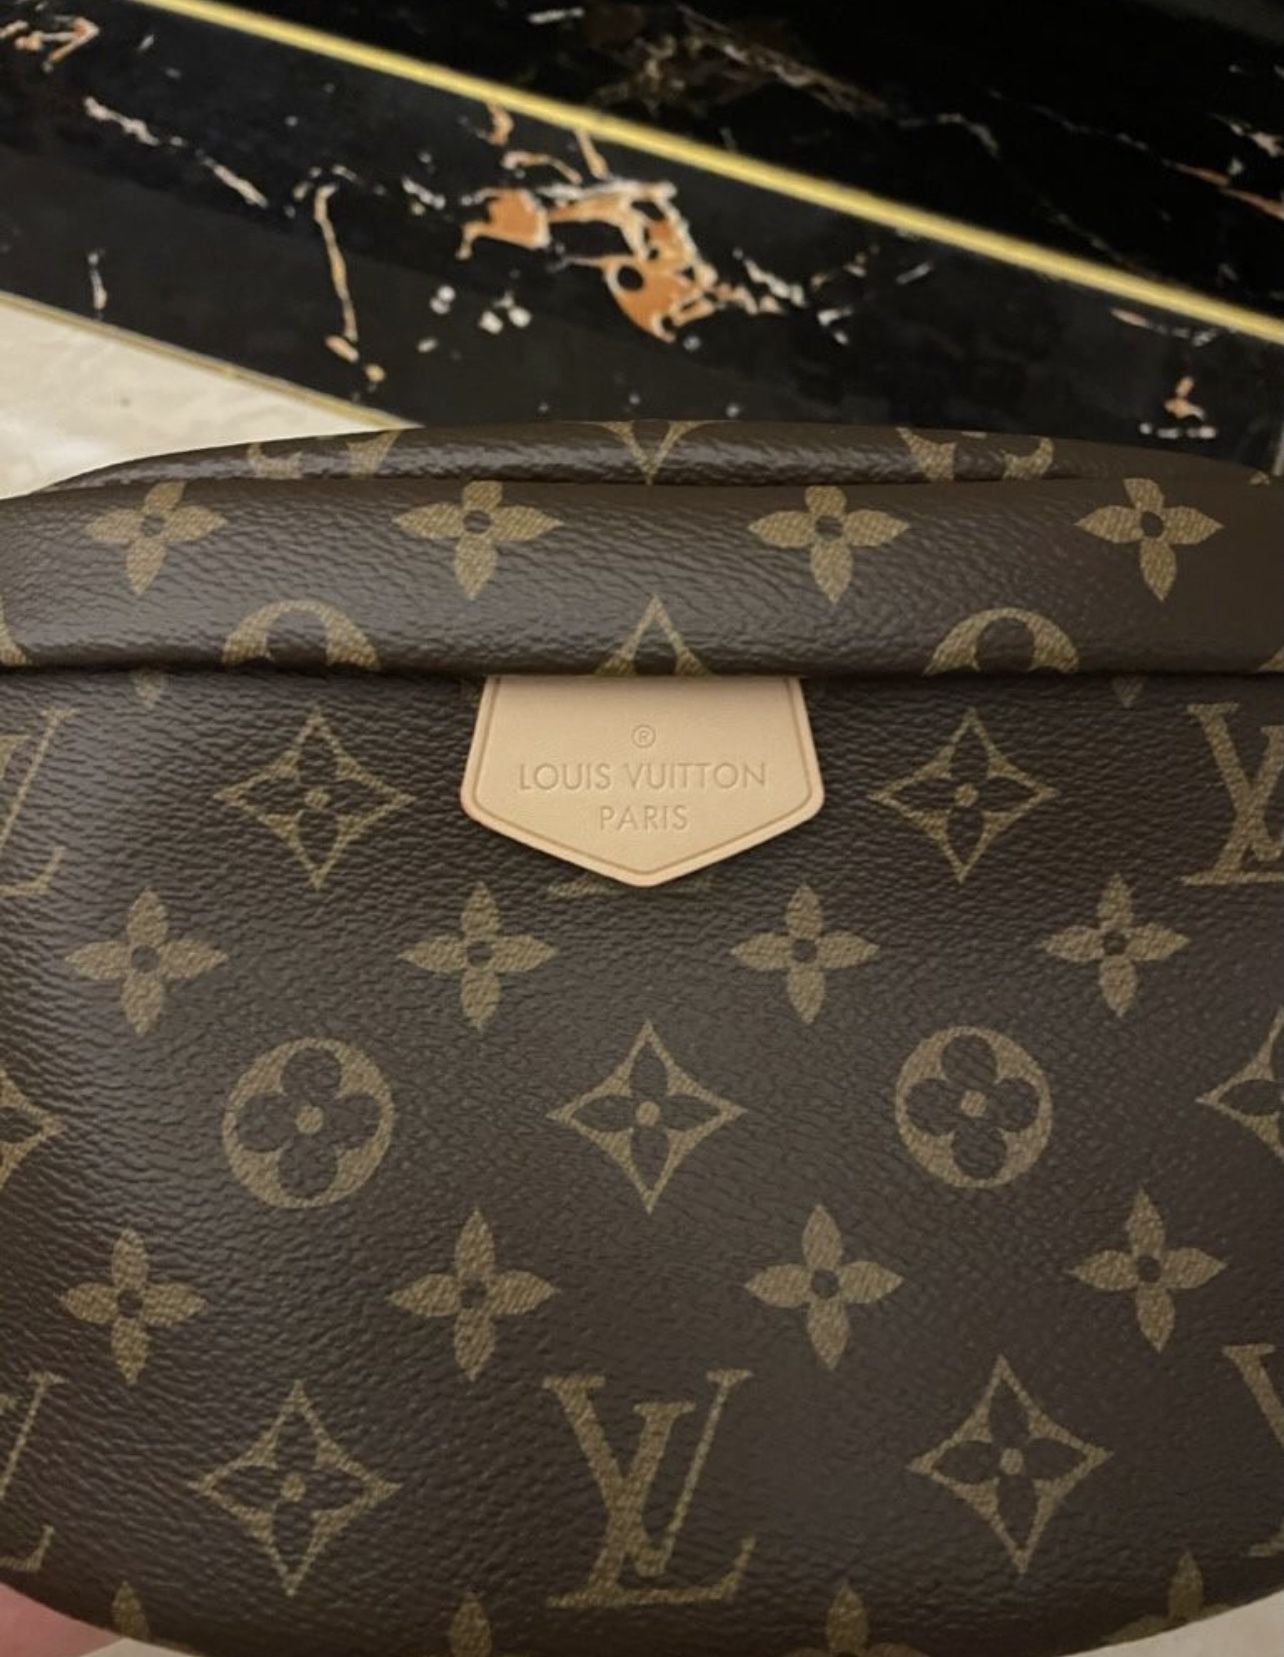 LV Monogram Fanny Pack Bum Bag for Sale in Queens, NY - OfferUp